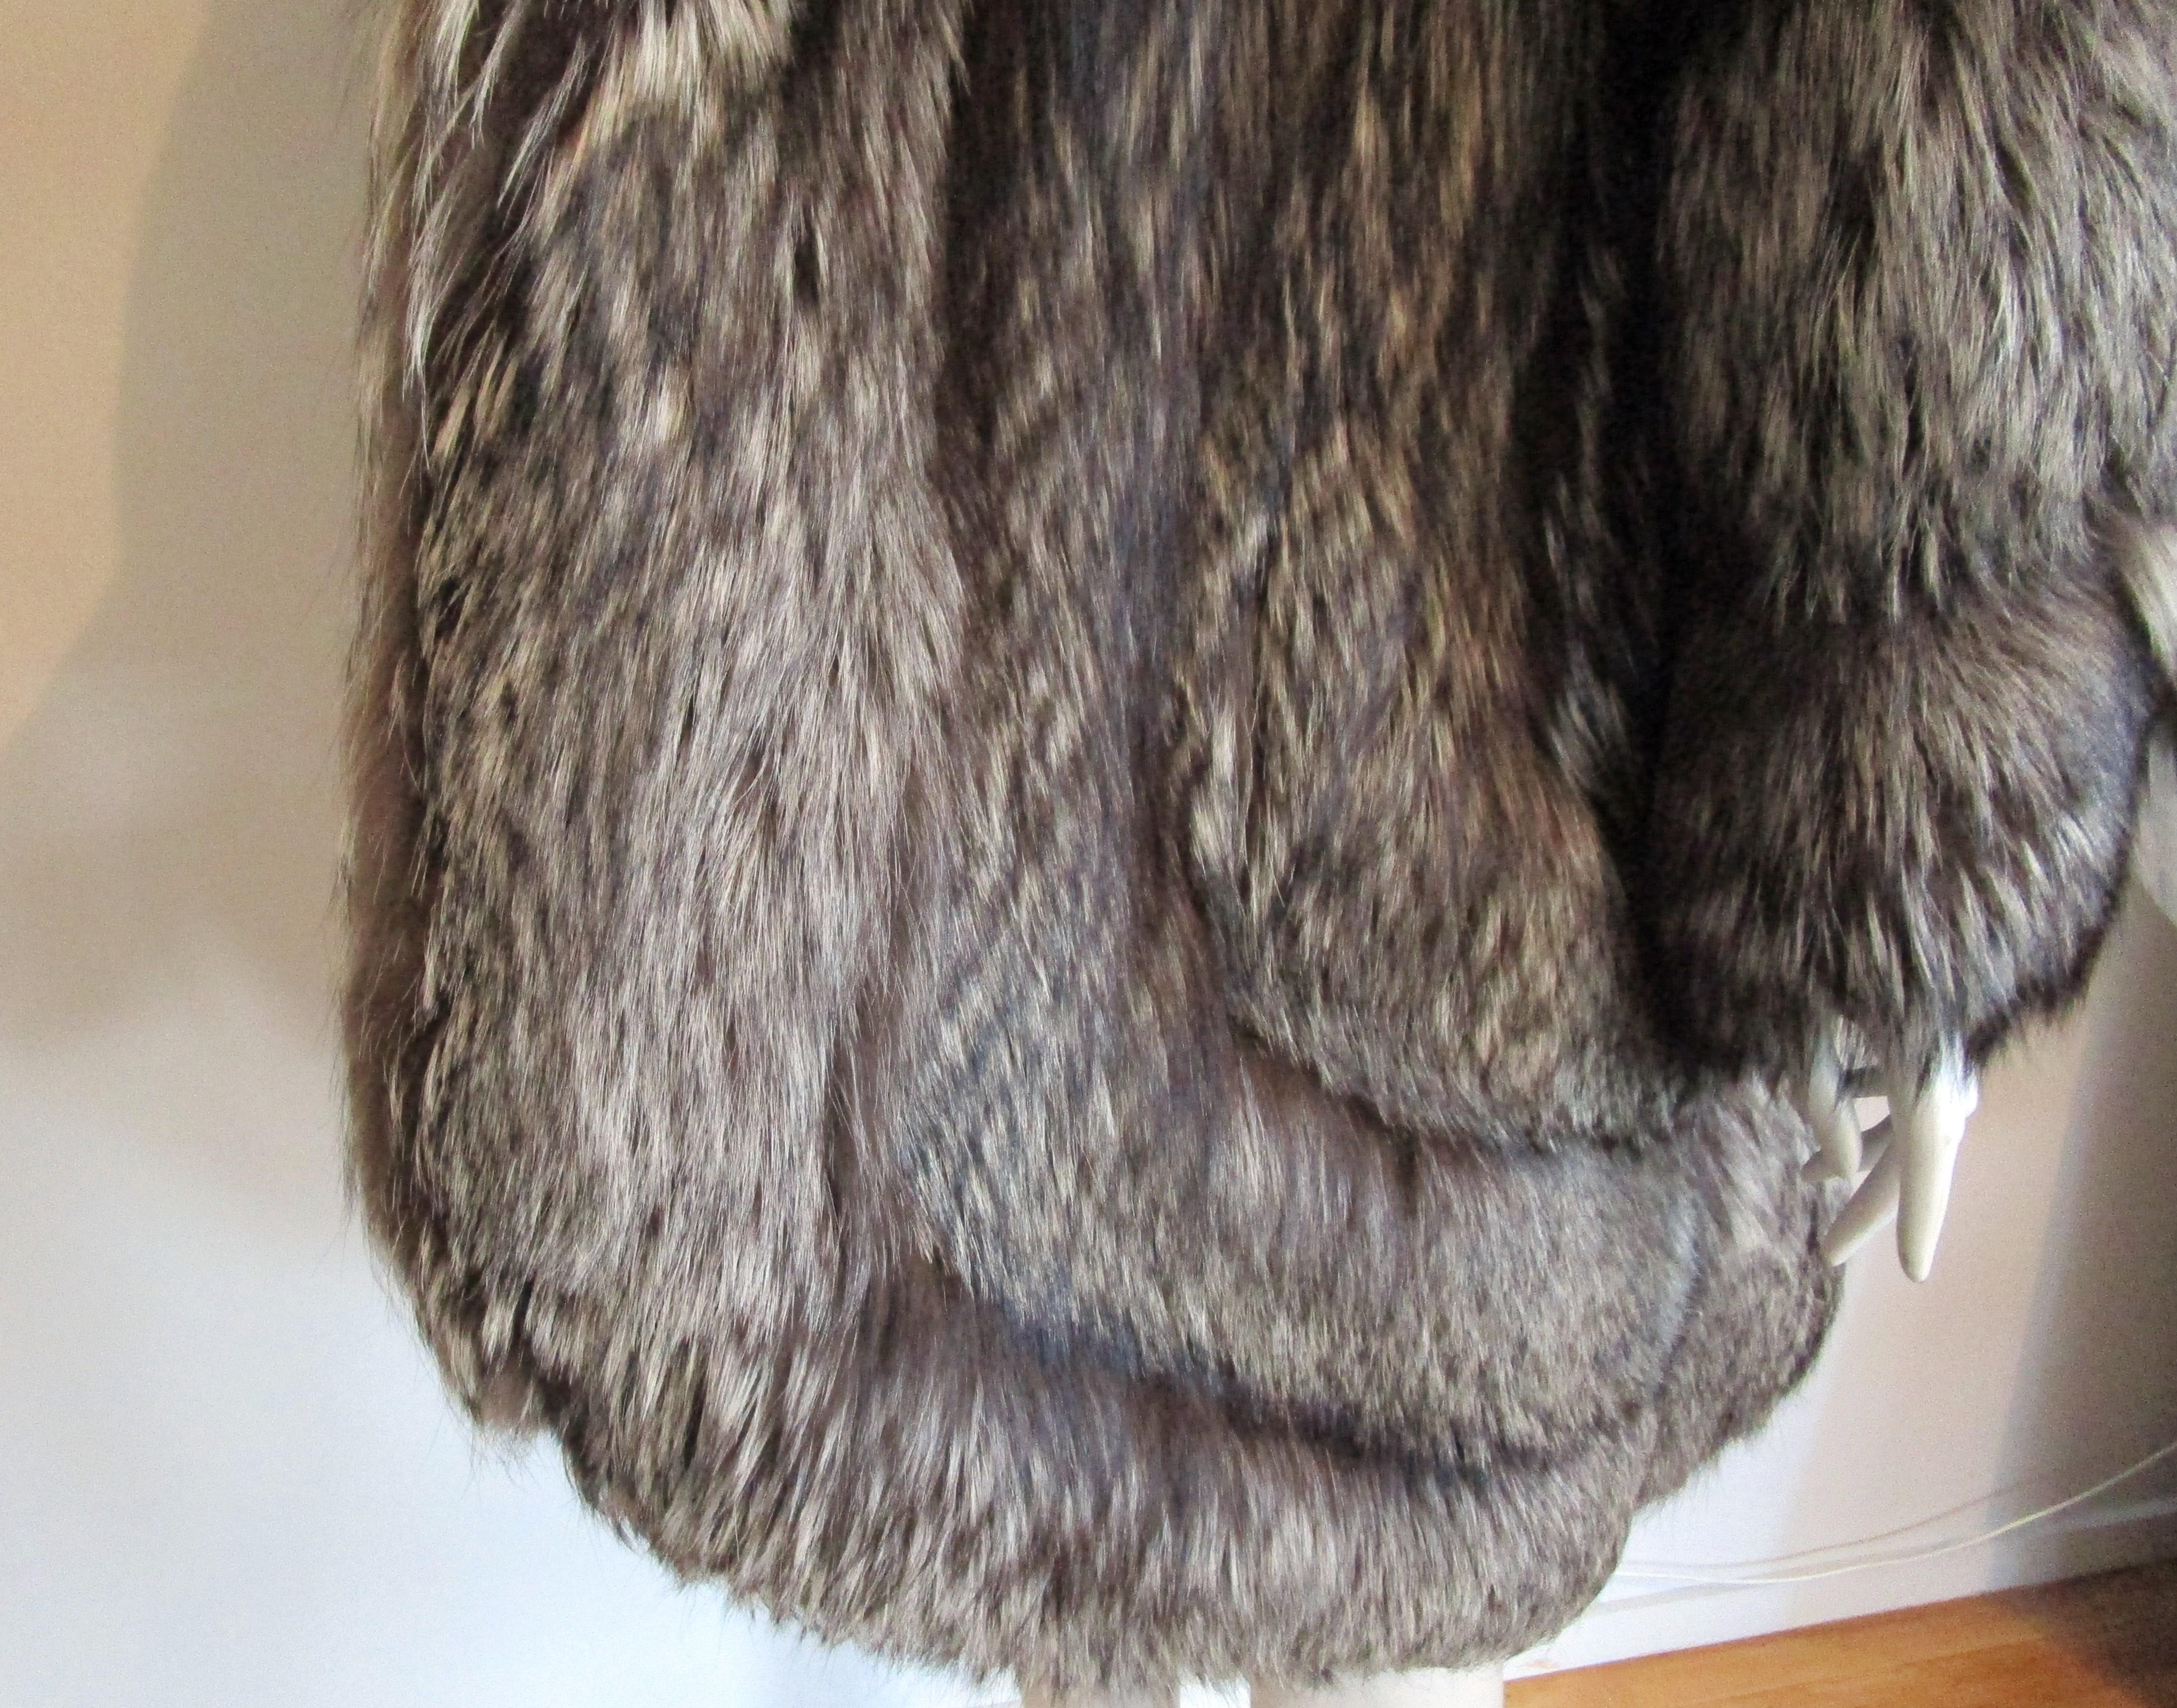  Fox Swing Coat Over sized Large Unisex - Silver Tipped 14-16 Scalloped Detail In Good Condition For Sale In Wallkill, NY